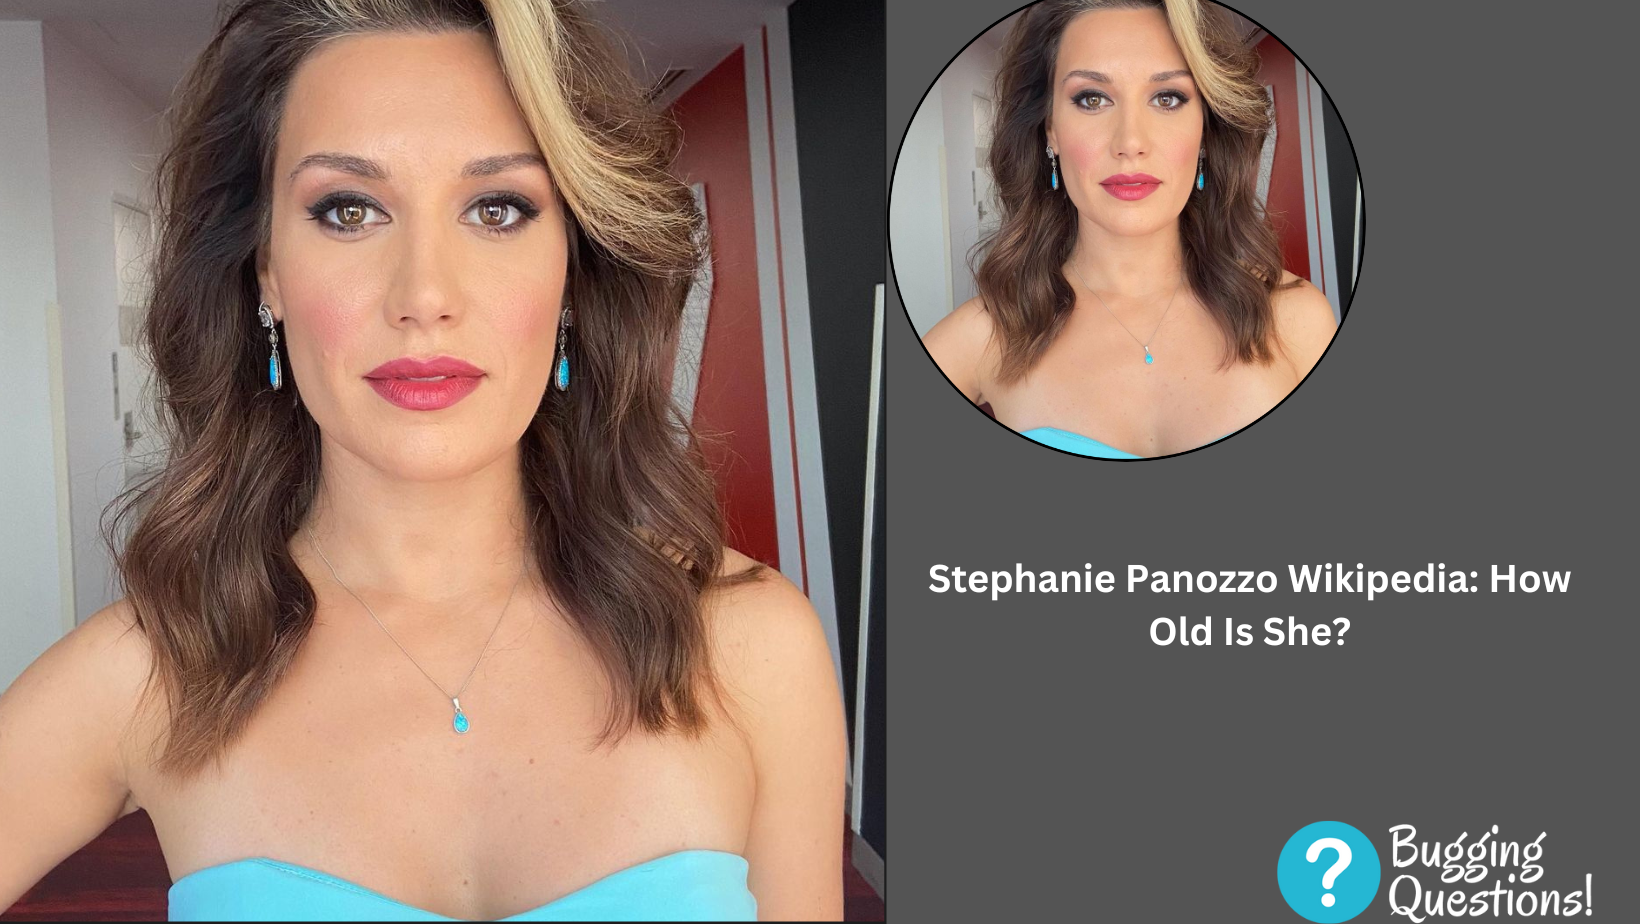 Stephanie Panozzo Wikipedia: How Old Is She?